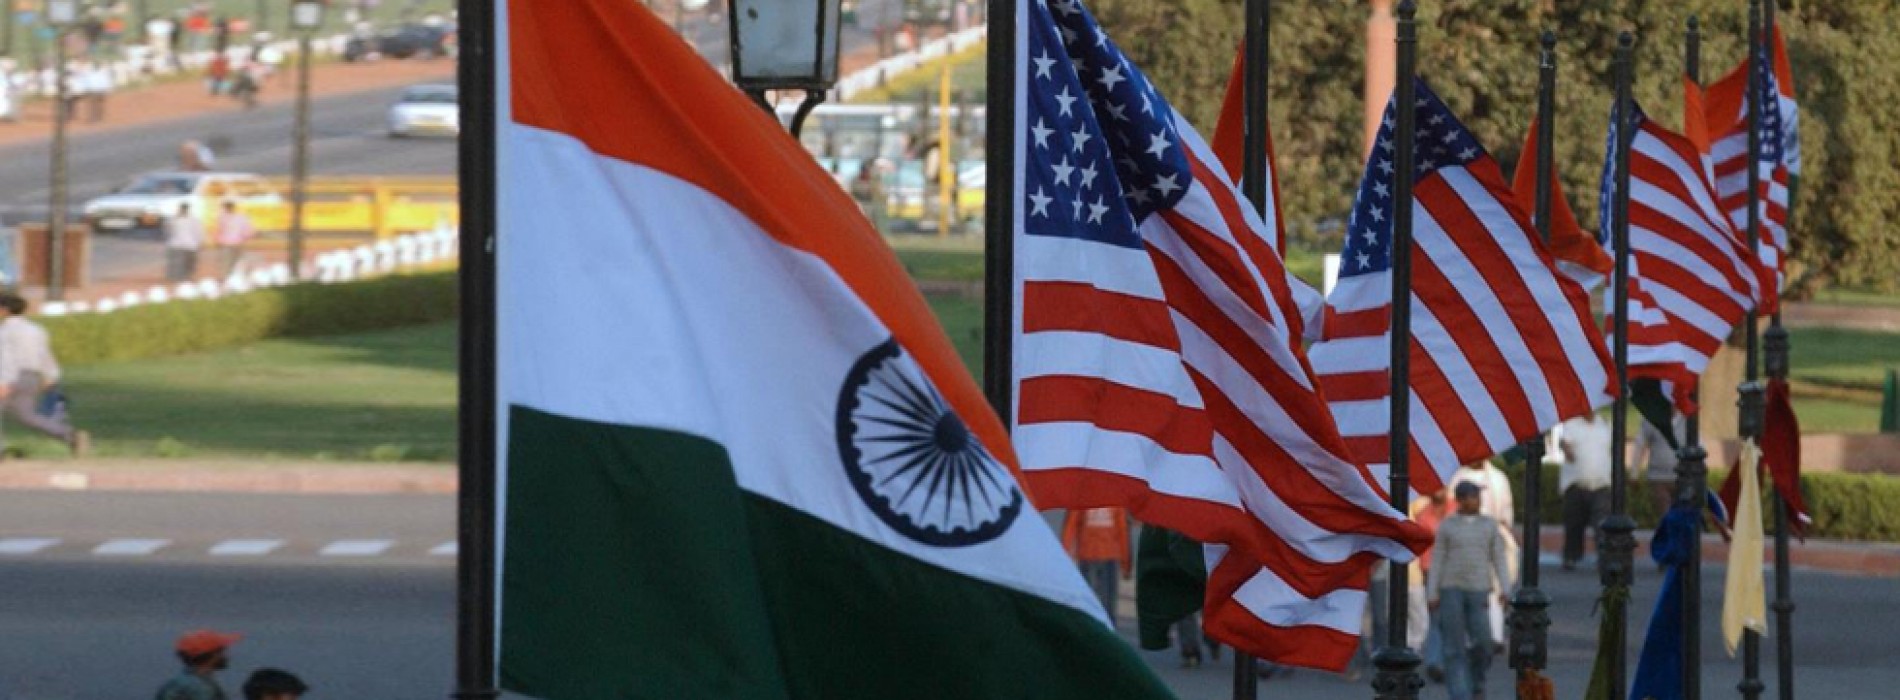 India, US to train African peacekeeping military personnel in trilateral cooperation initiative